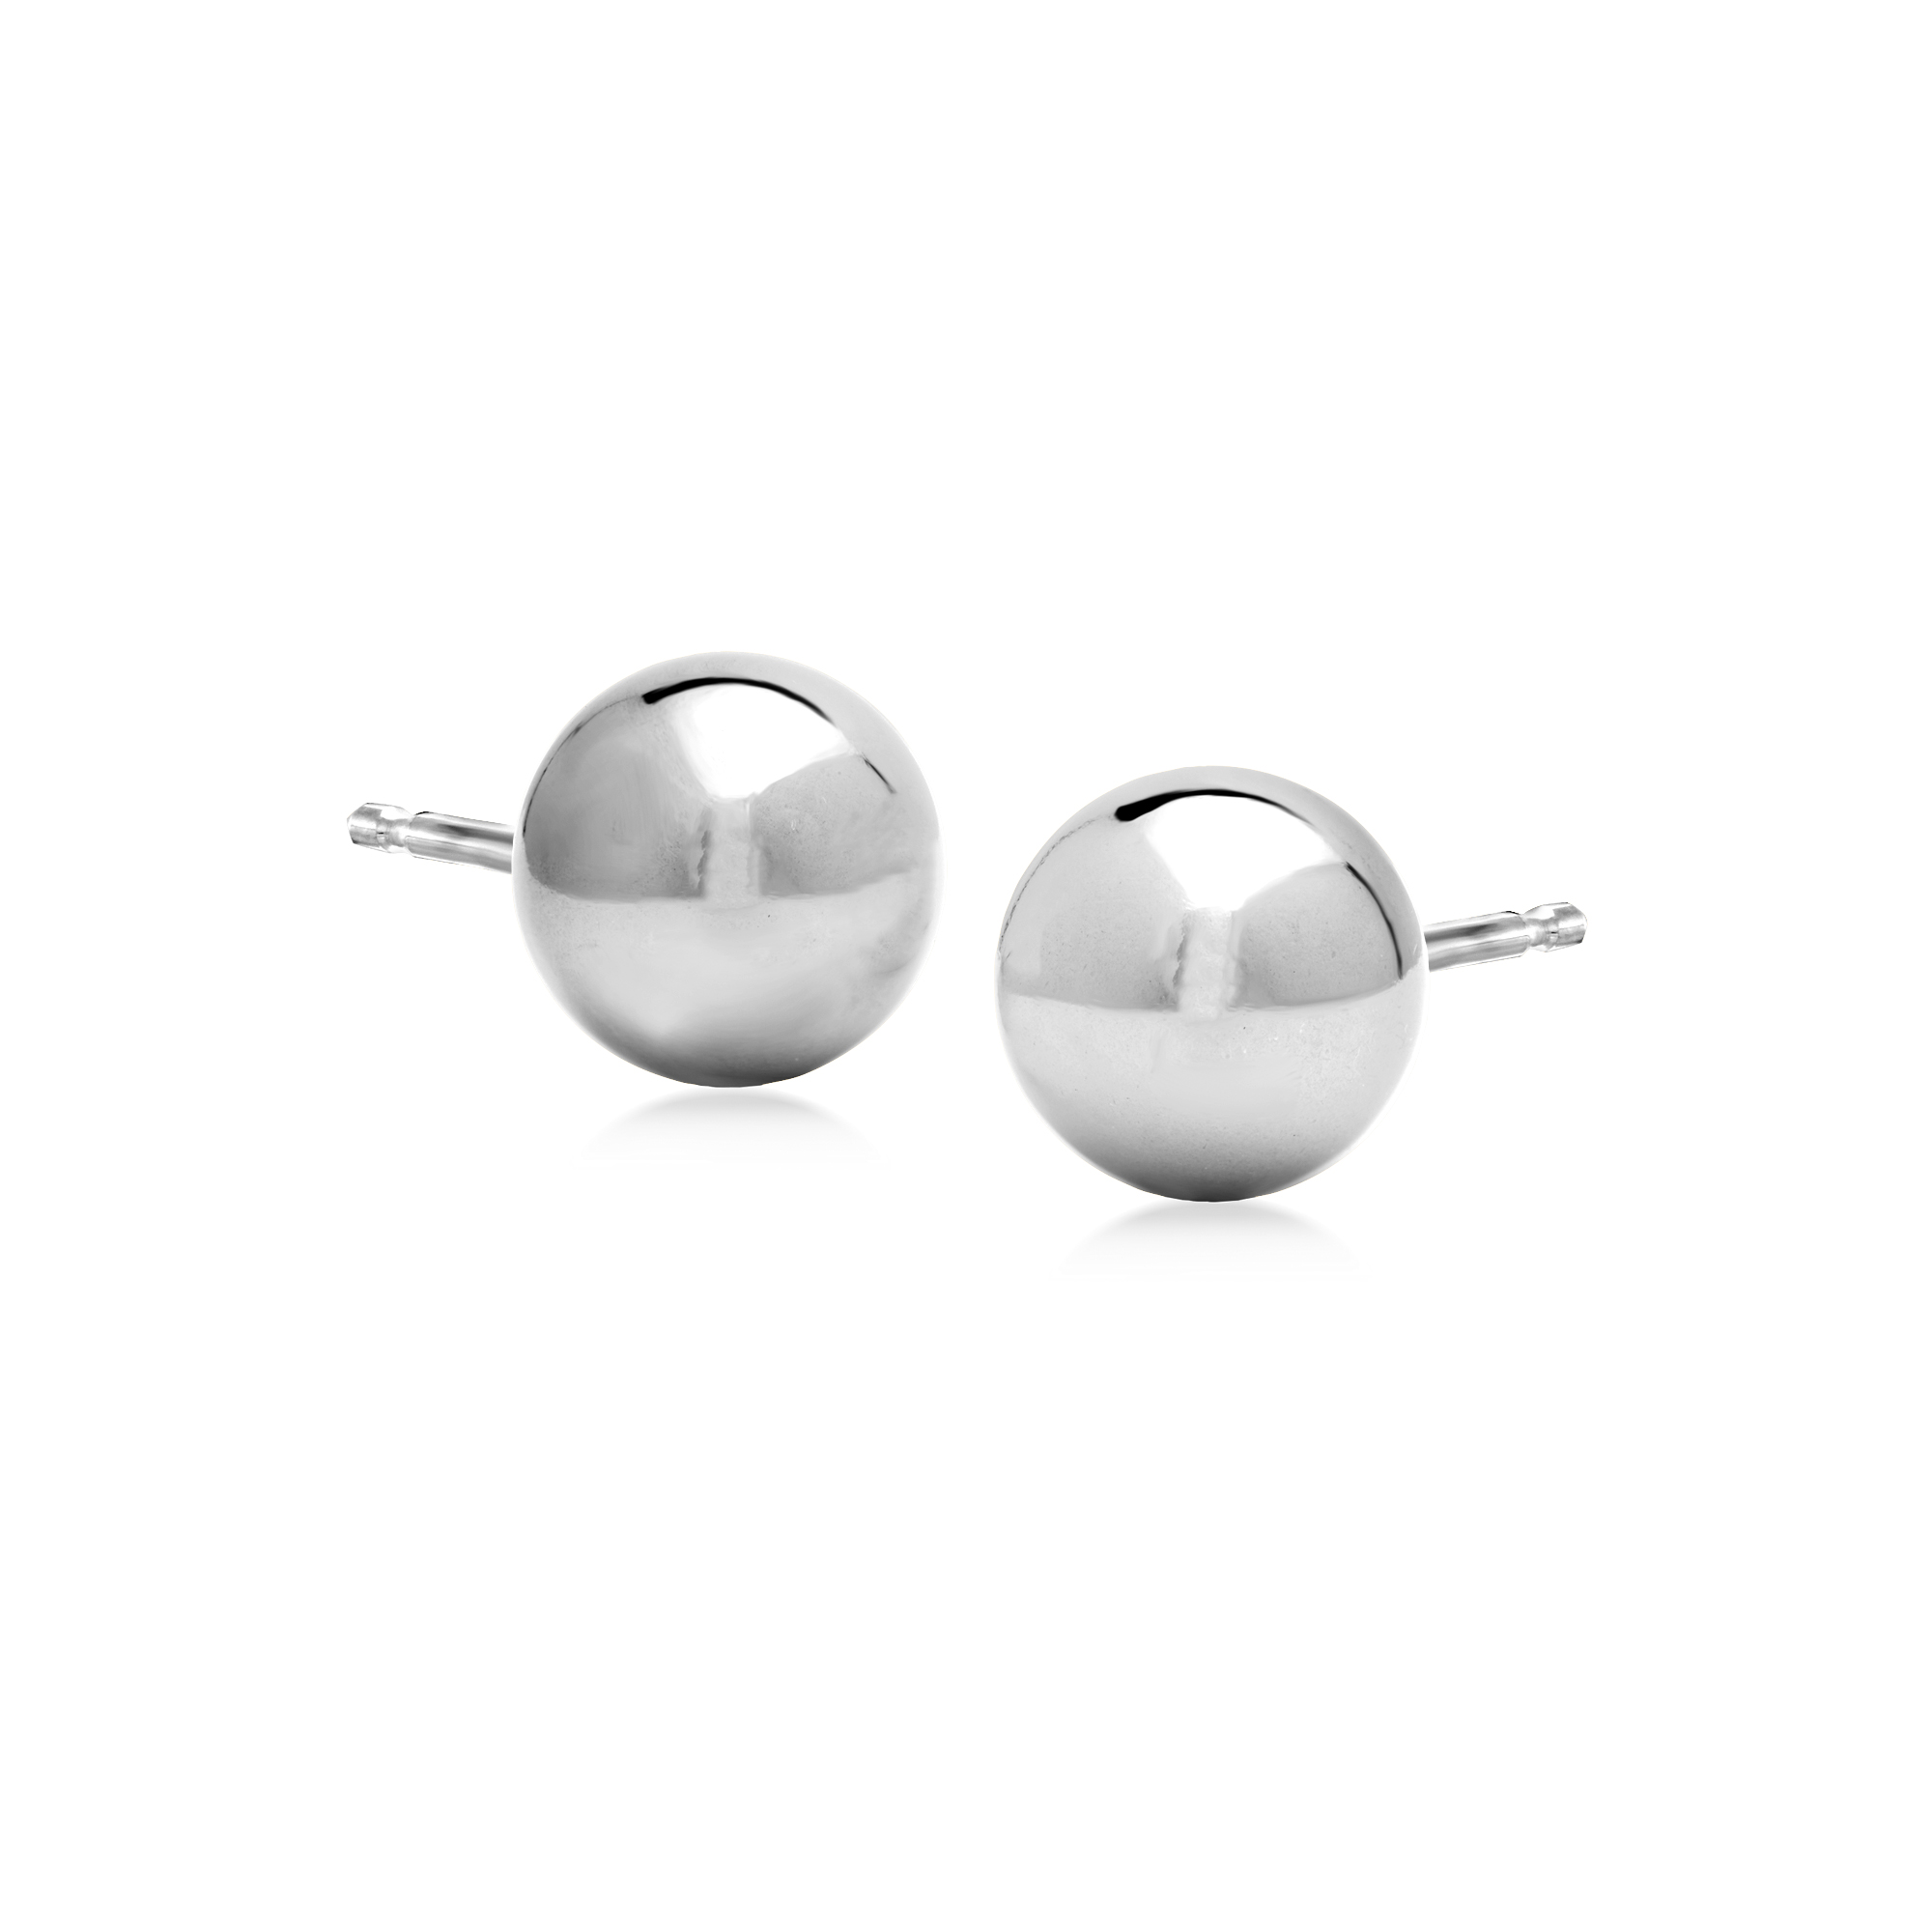 Details about   .925 Sterling Silver 8 MM Children's Horse Post Stud Earrings MSRP $35 